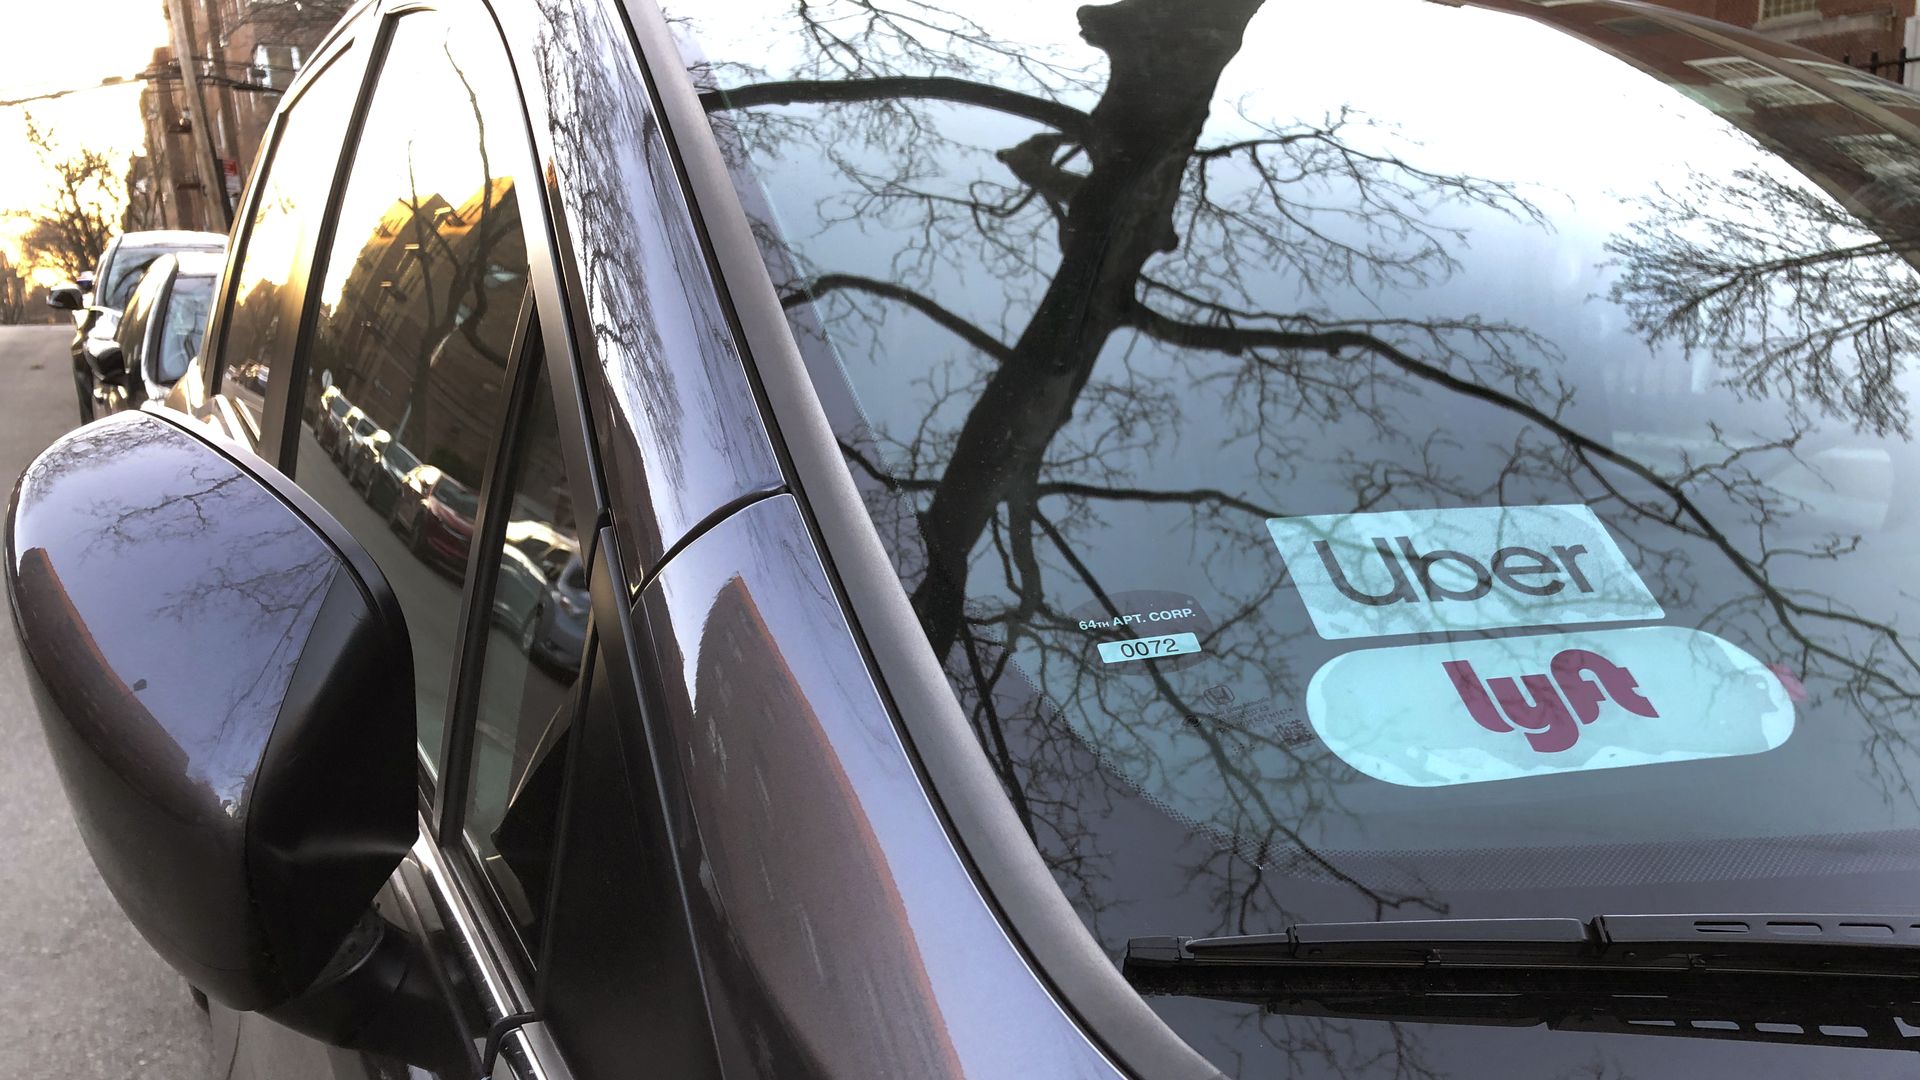 Uber and Lyft sign in windshield of car.